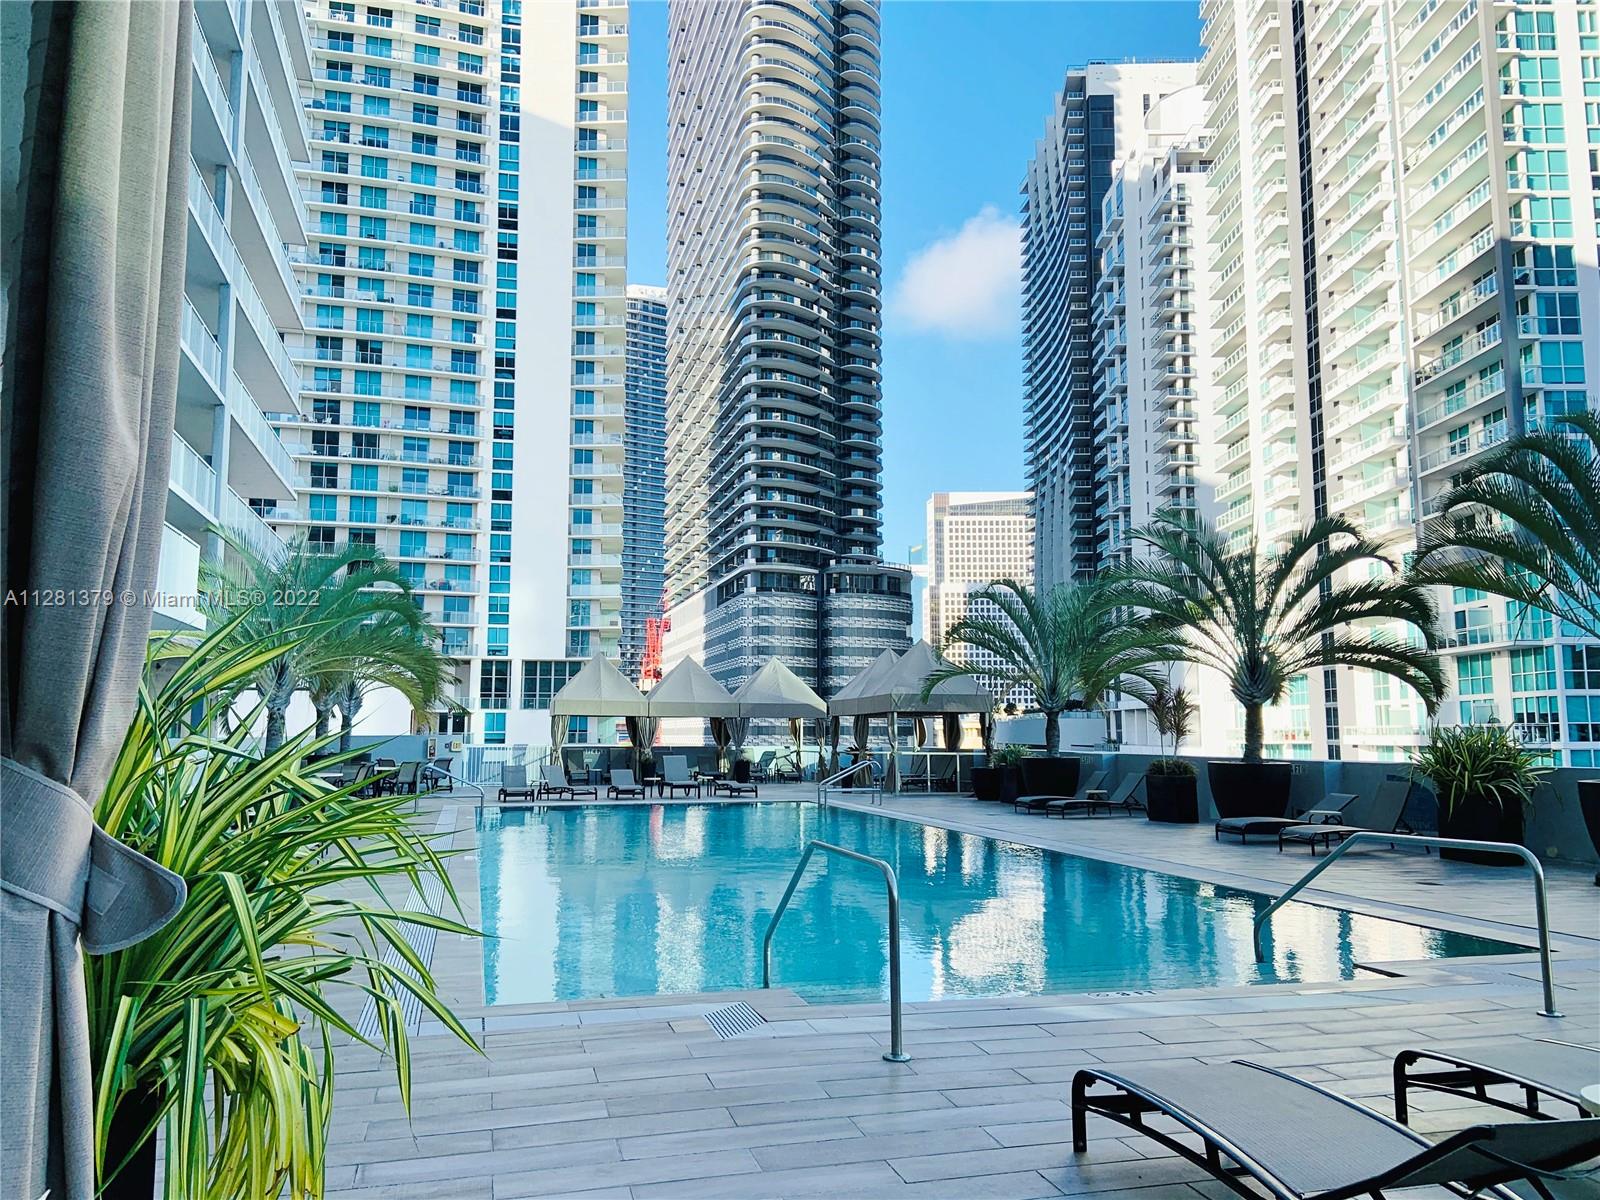 Nicely Furnished or Unfurnished , this one bedroom one and a half baths apartment at The Vue at Brickell has it all: Preferred east side view, high ceilings, top floor in the 08 line, spacious floor plan, walk-in closet, remodeled open kitchen to the living/dining area, granite countertops in kitchen and both bathrooms, tile and wood floors (no carpet!!!!), full size washer and dryer and fast Google Fiber Web pass Internet included.
Best location on Brickell area to walk to all area restaurants, Brickell City Center and Brickell Financial District.
 It won't last !!